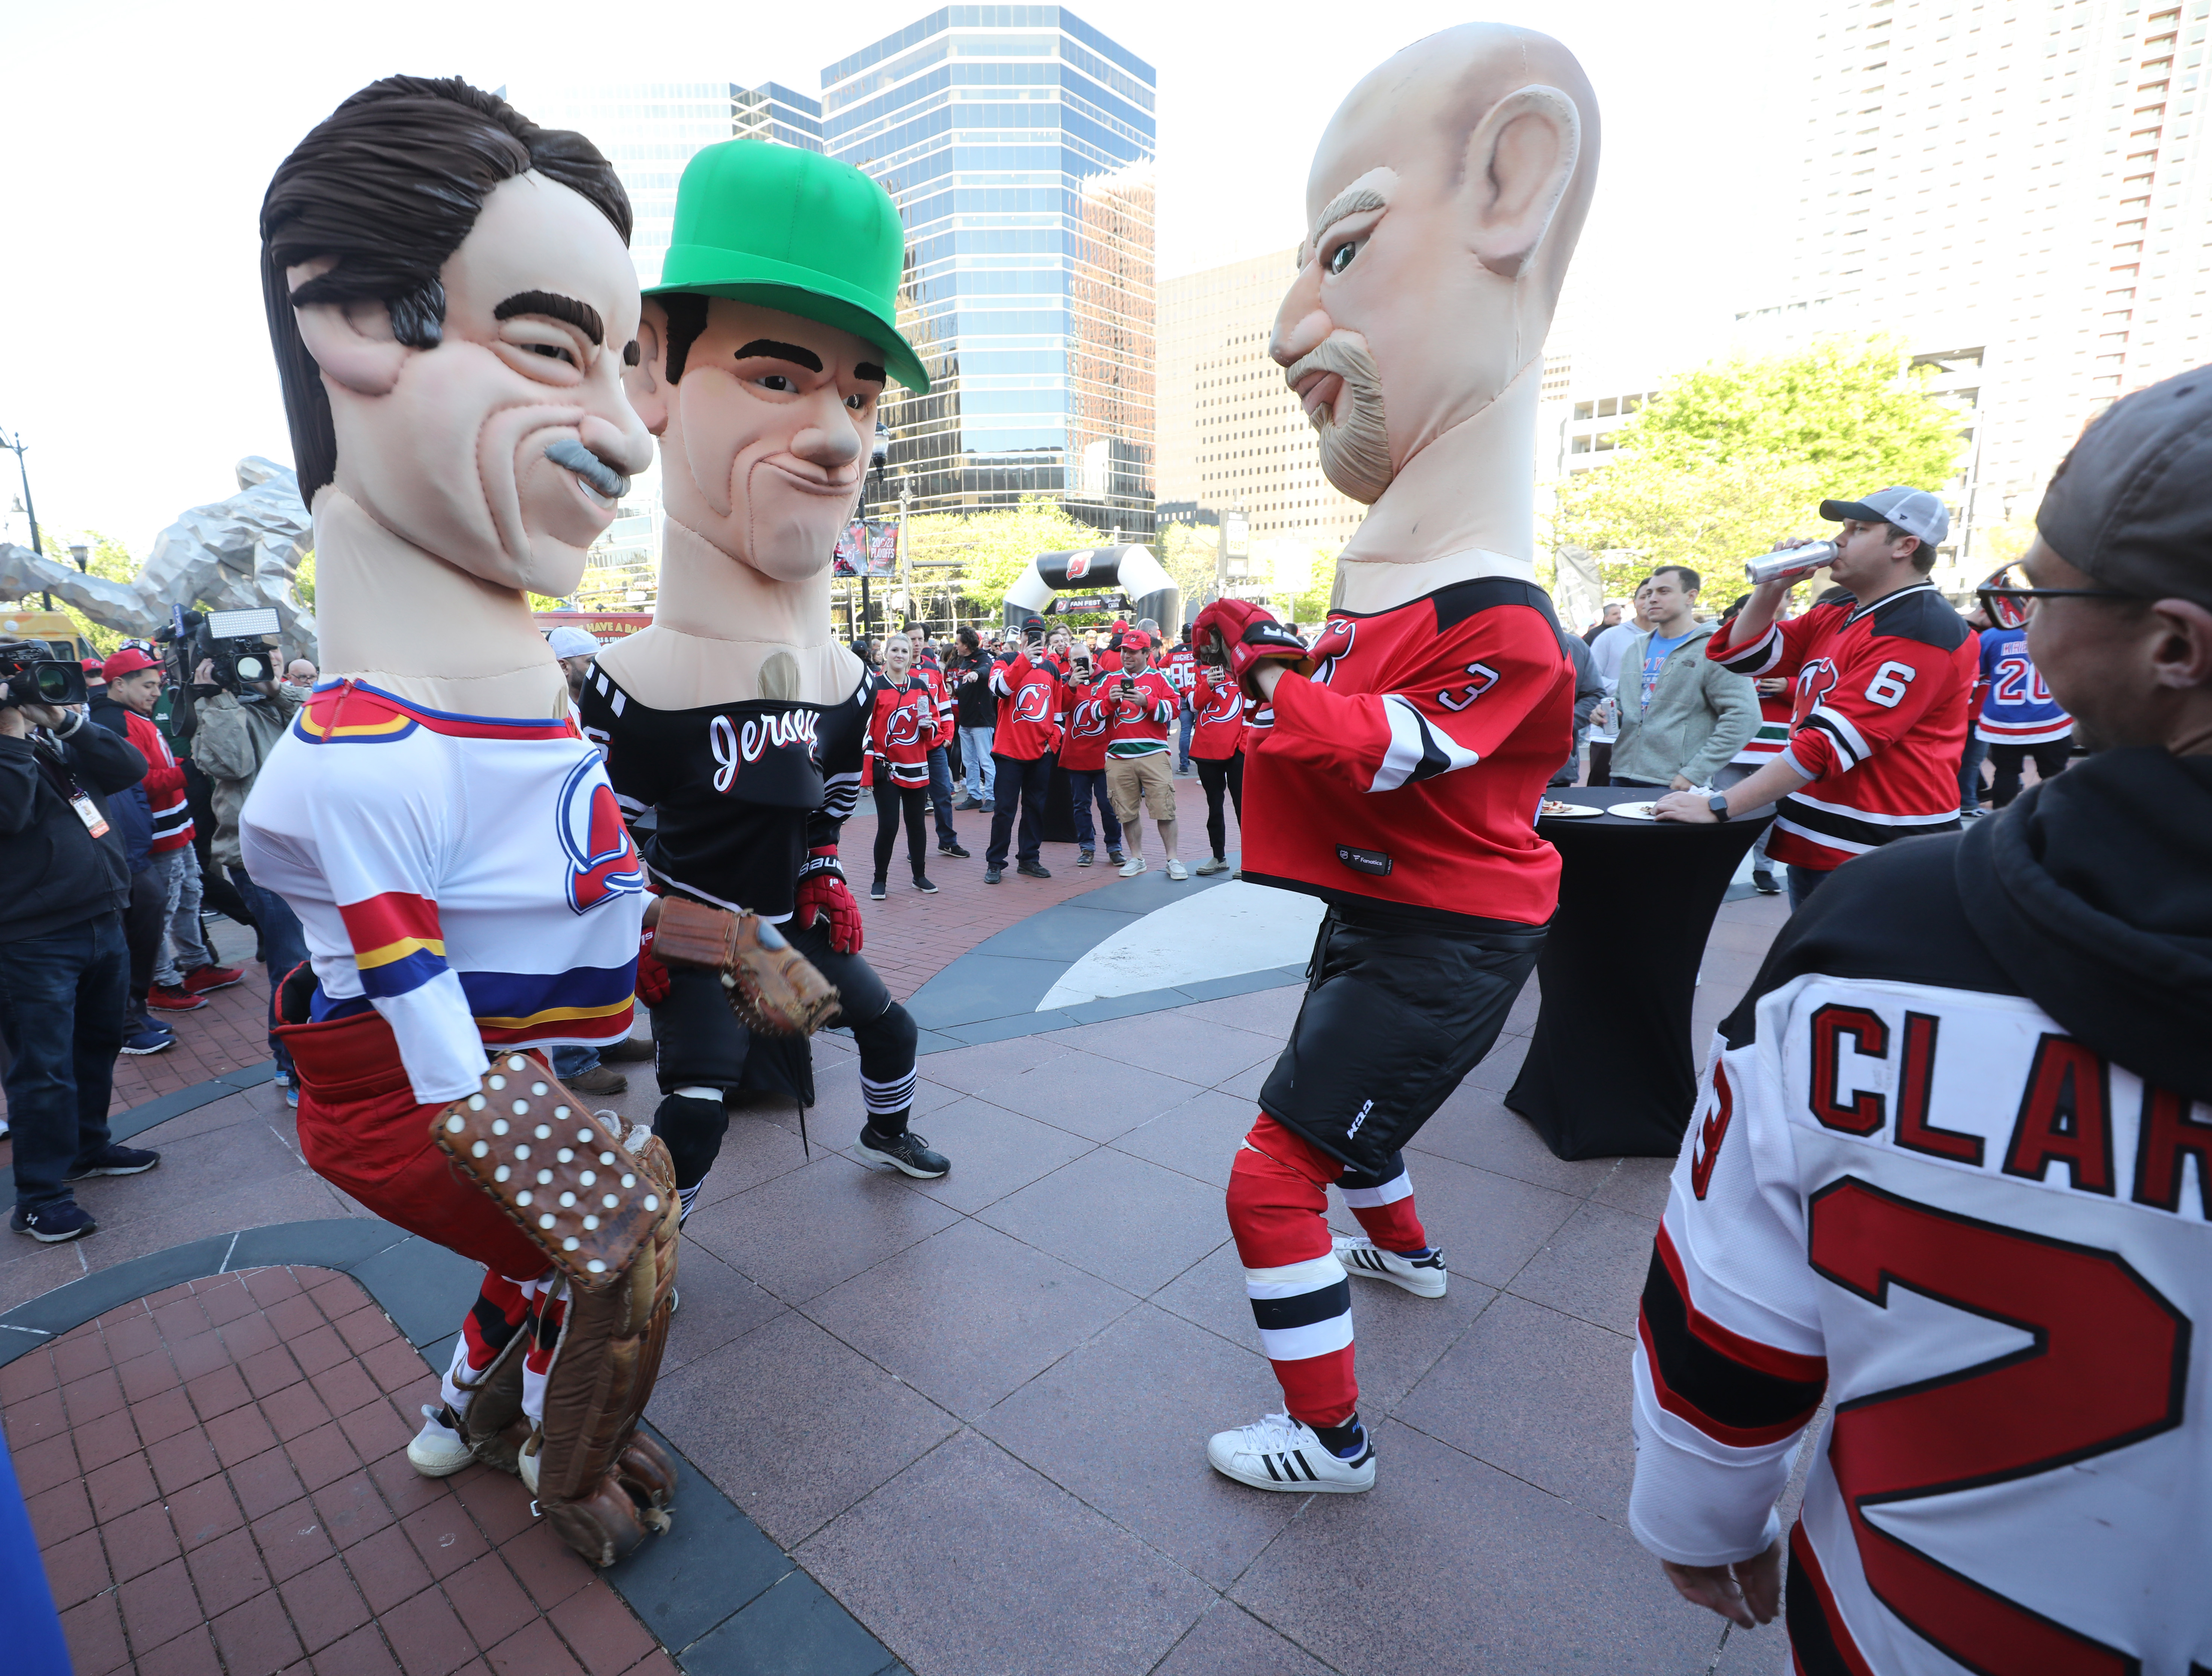 Three giant caricatures of former New Jersey Devils players (l to r) Chico Resch, Patrik Elias and Ken Daneyko dance outside Prudential Center on Tuesday, April 18, 2023 in Newark, N.J. The Devils lost to the New York Rangers, 5-1, in Game 1 of the NHL Stanley Cup playoffs.